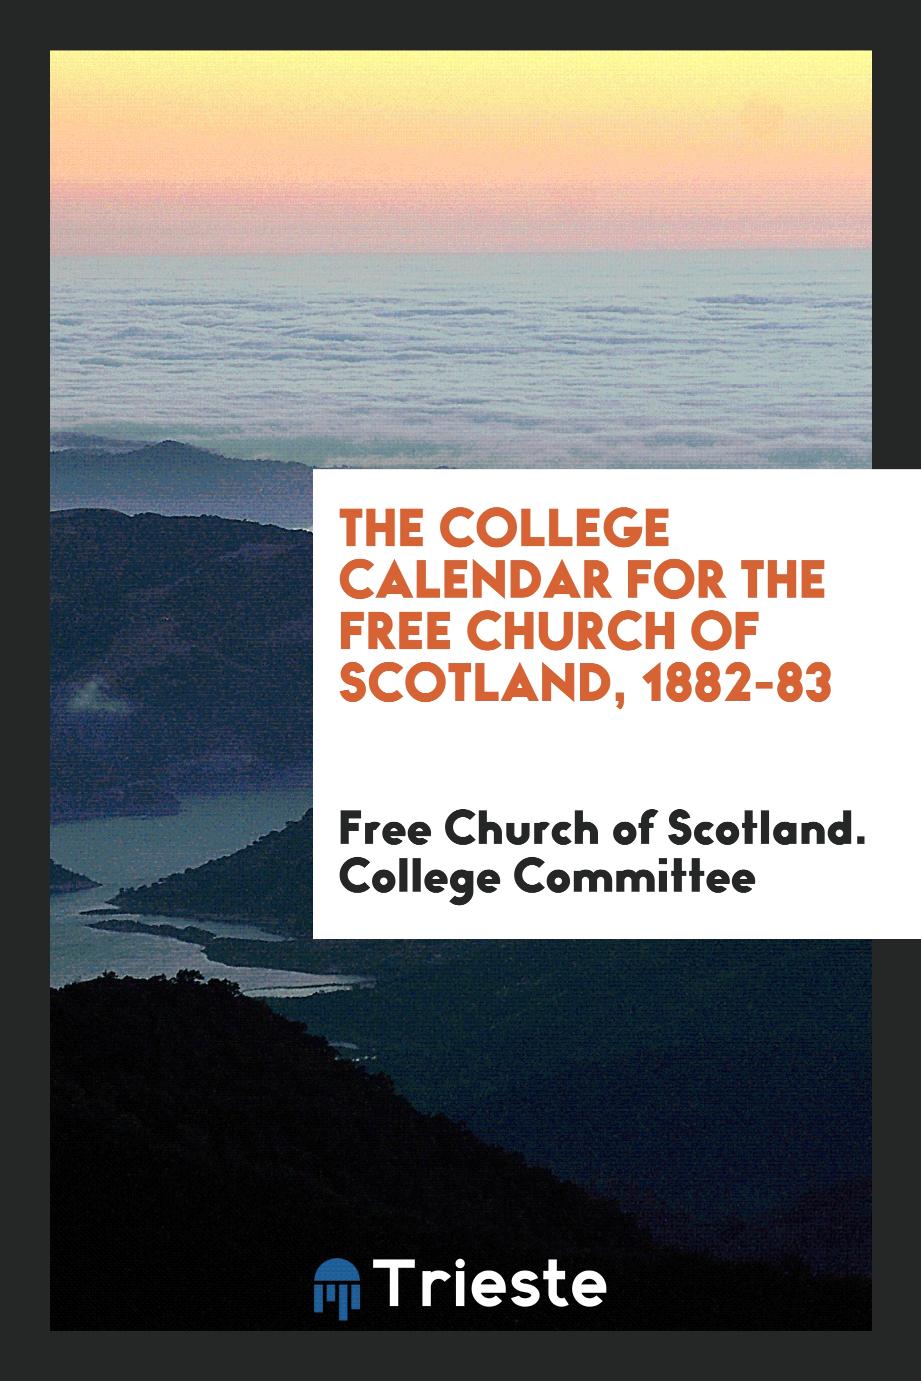 The College Calendar for the Free Church of Scotland, 1882-83